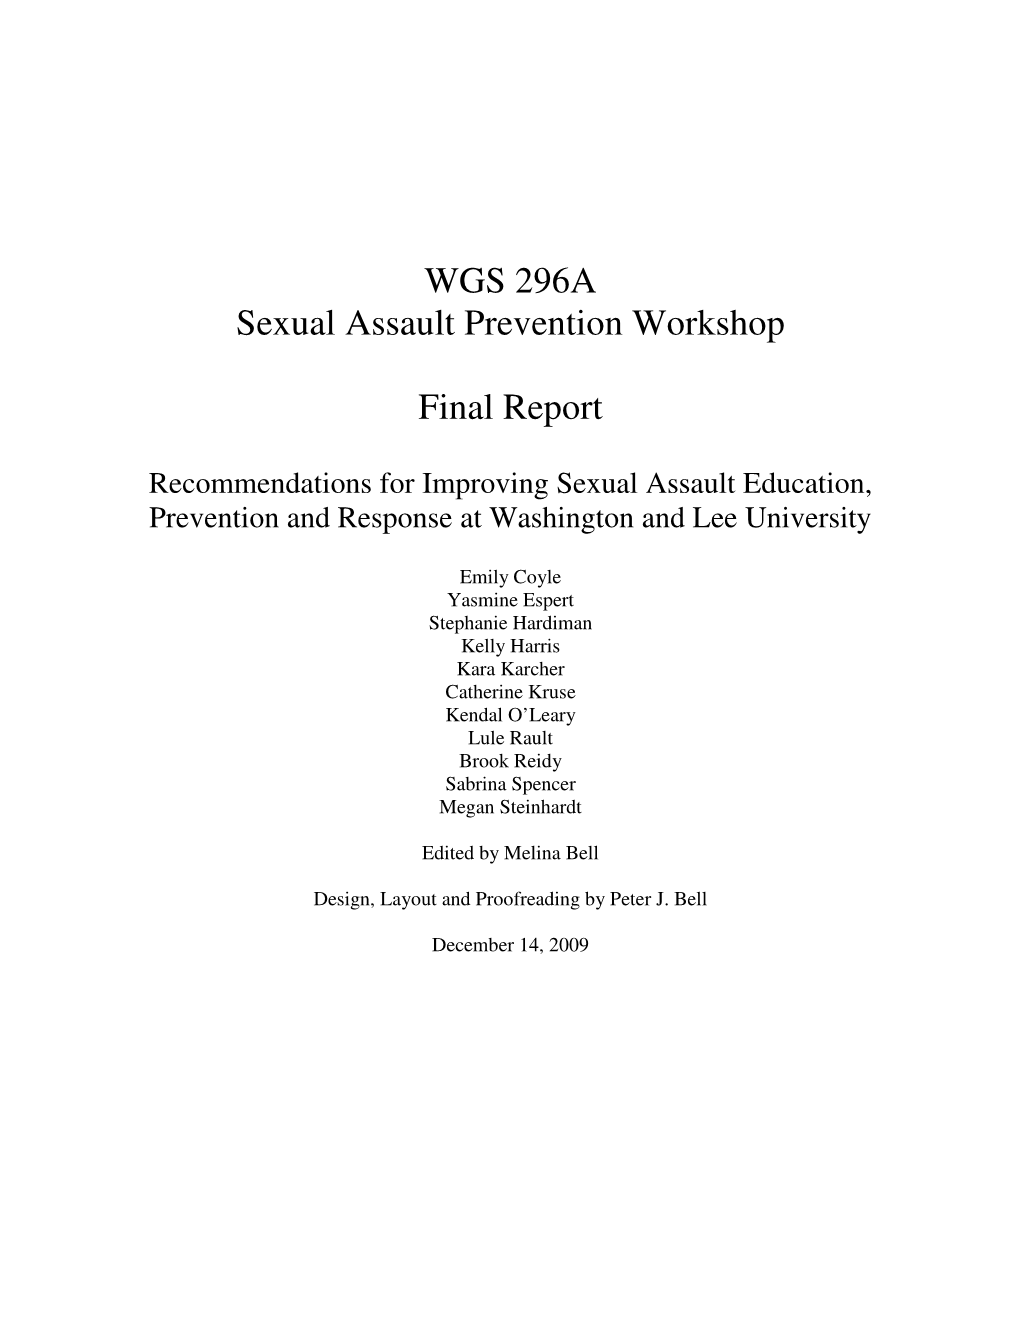 WGS 296A Sexual Assault Prevention Workshop Final Report